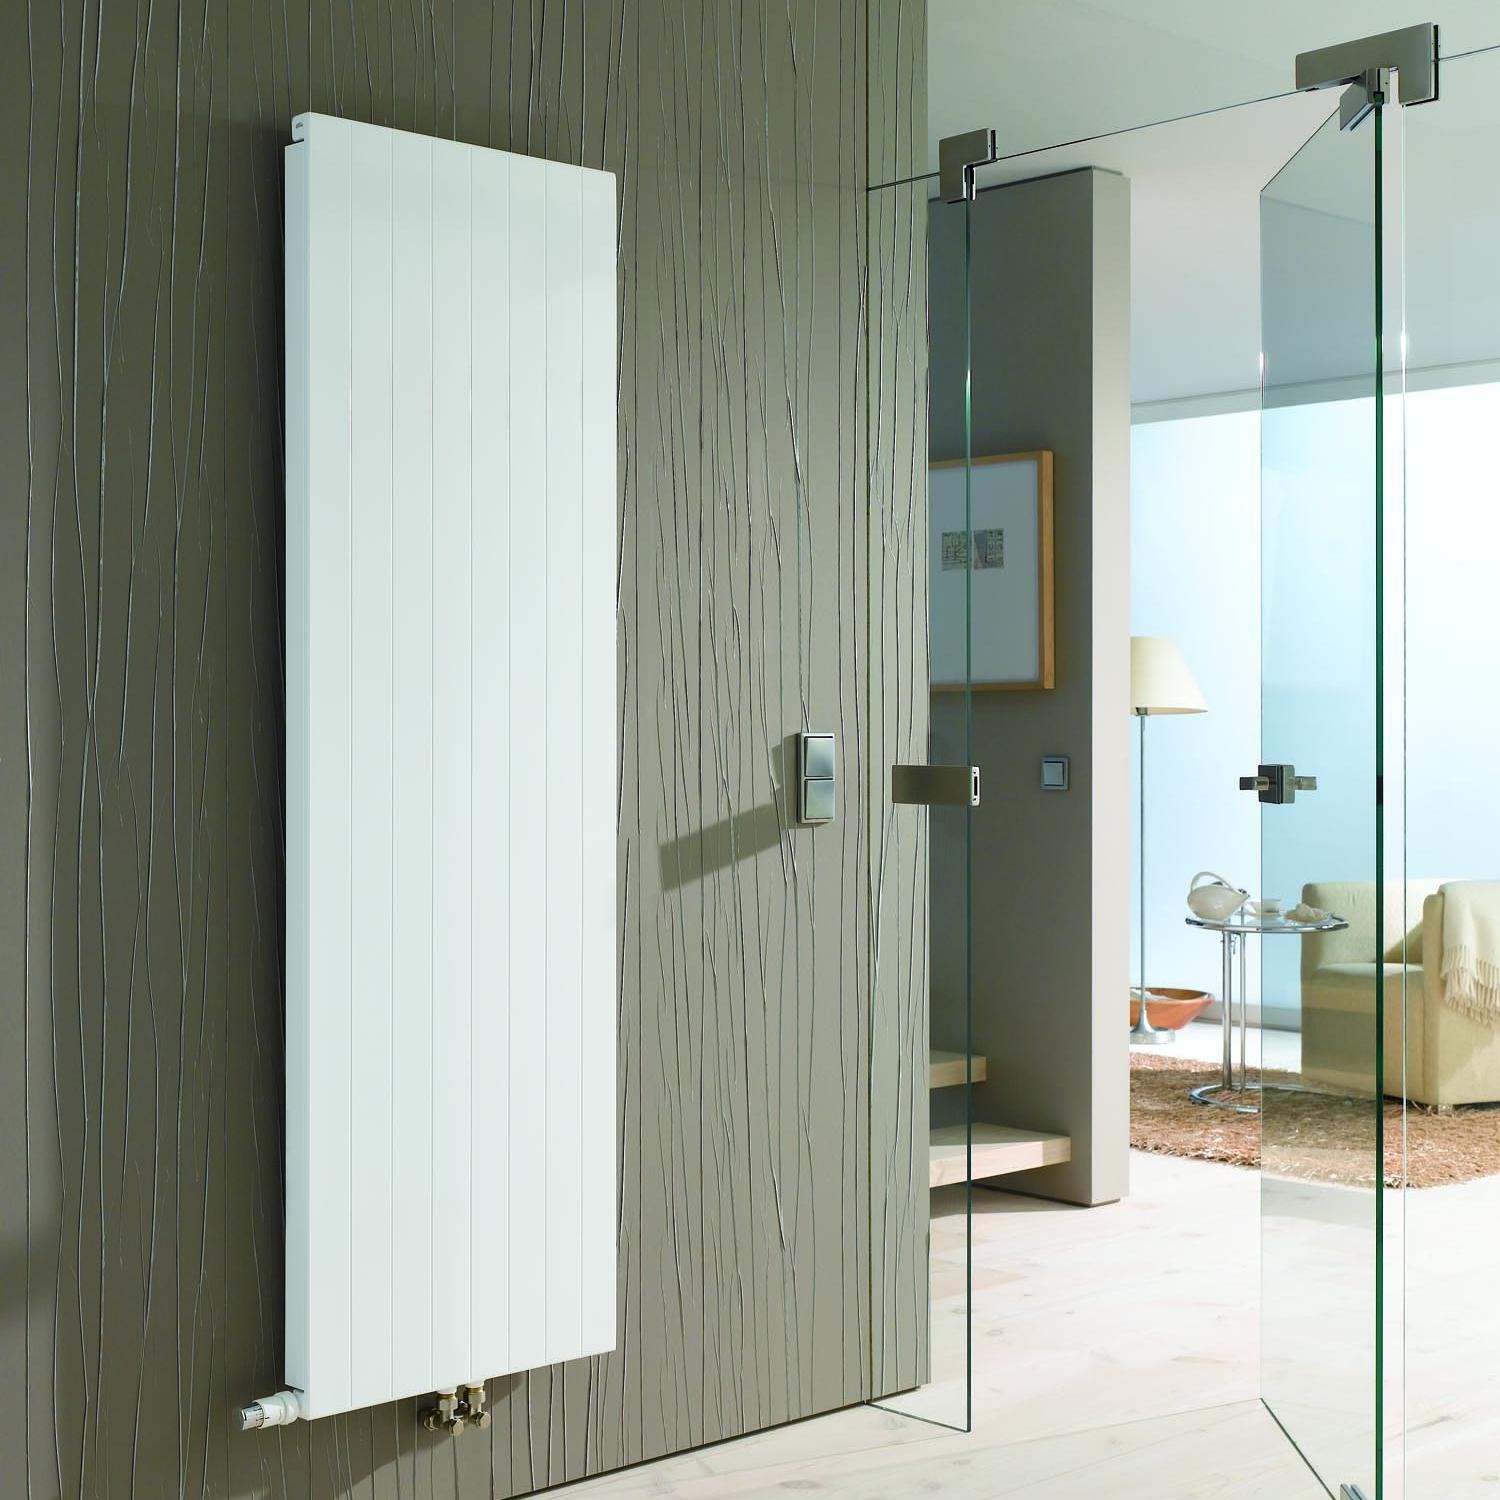 A vertical, slimline version of the Kermi valve heating panel in the form of a radiator that is tailored specifically to foyers, stairwells, and lobbies.